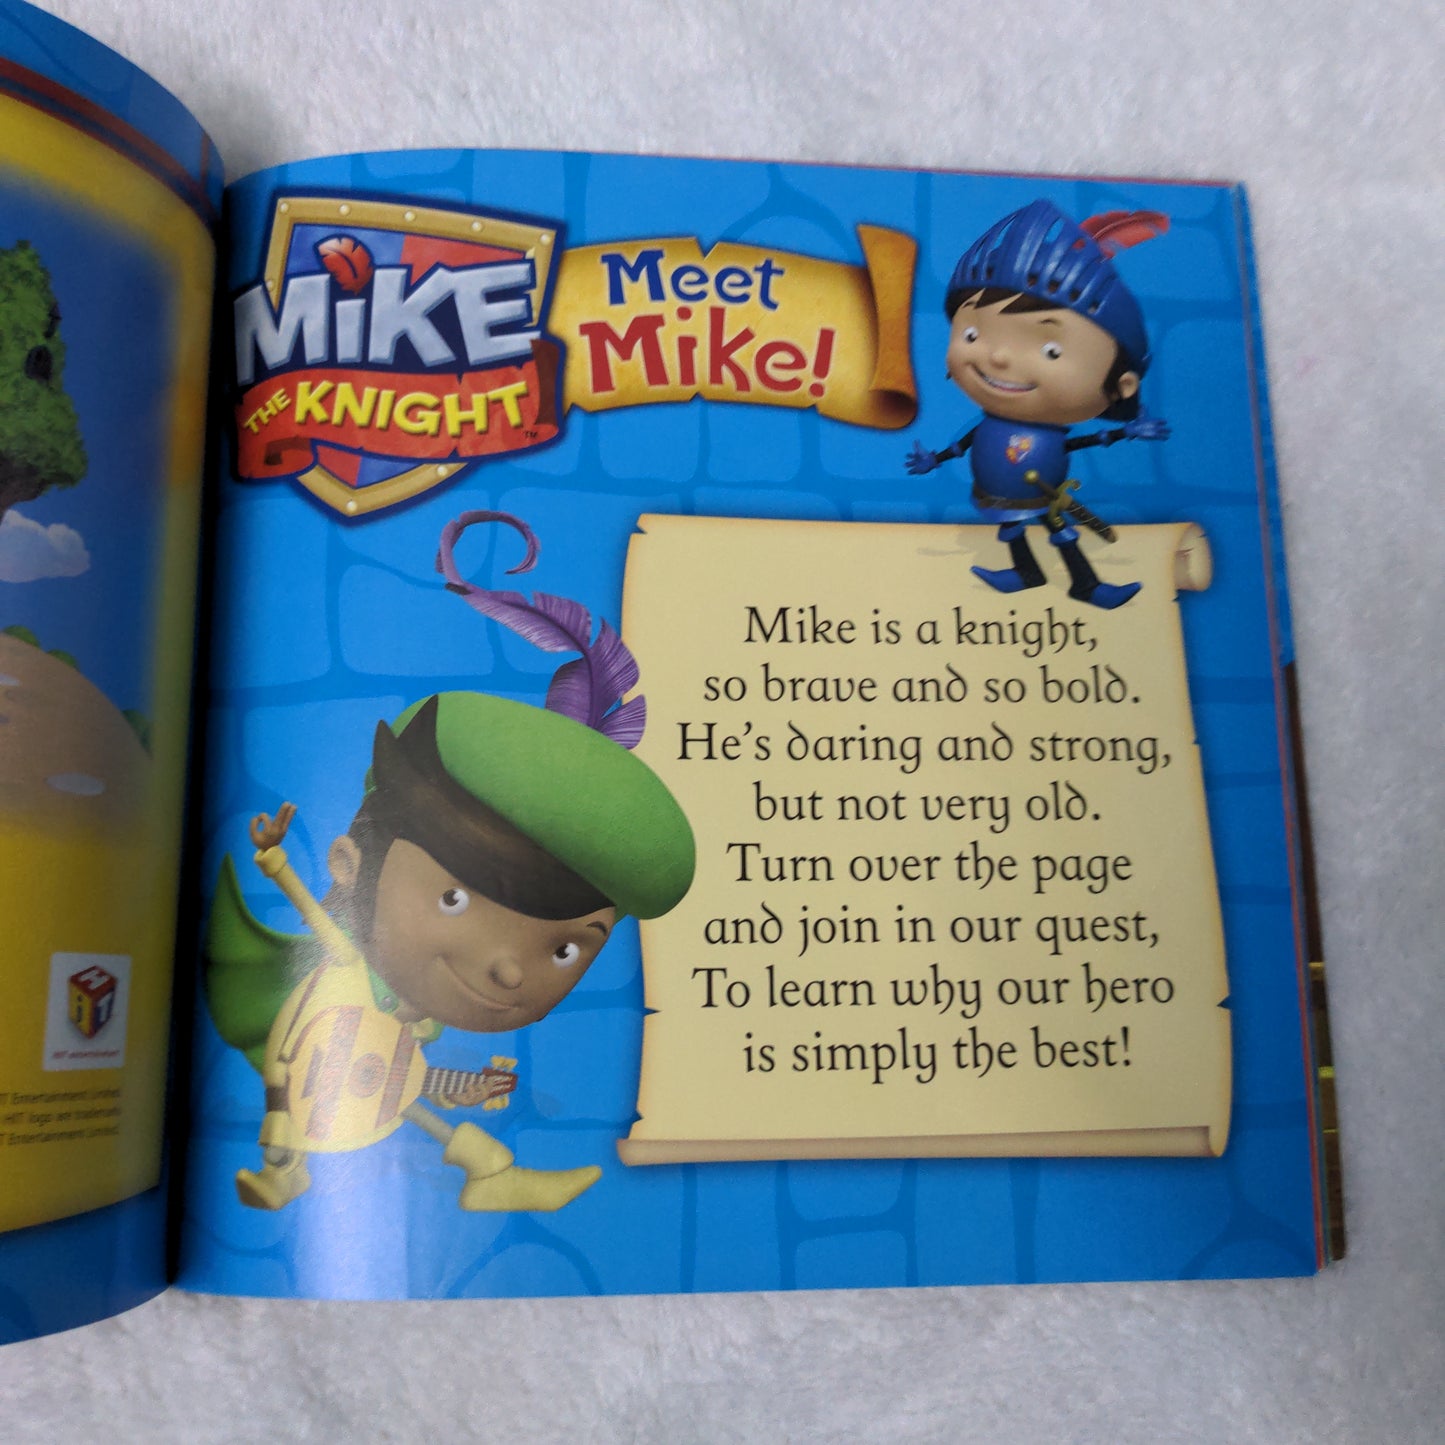 Mike the Knight - Meet Mike